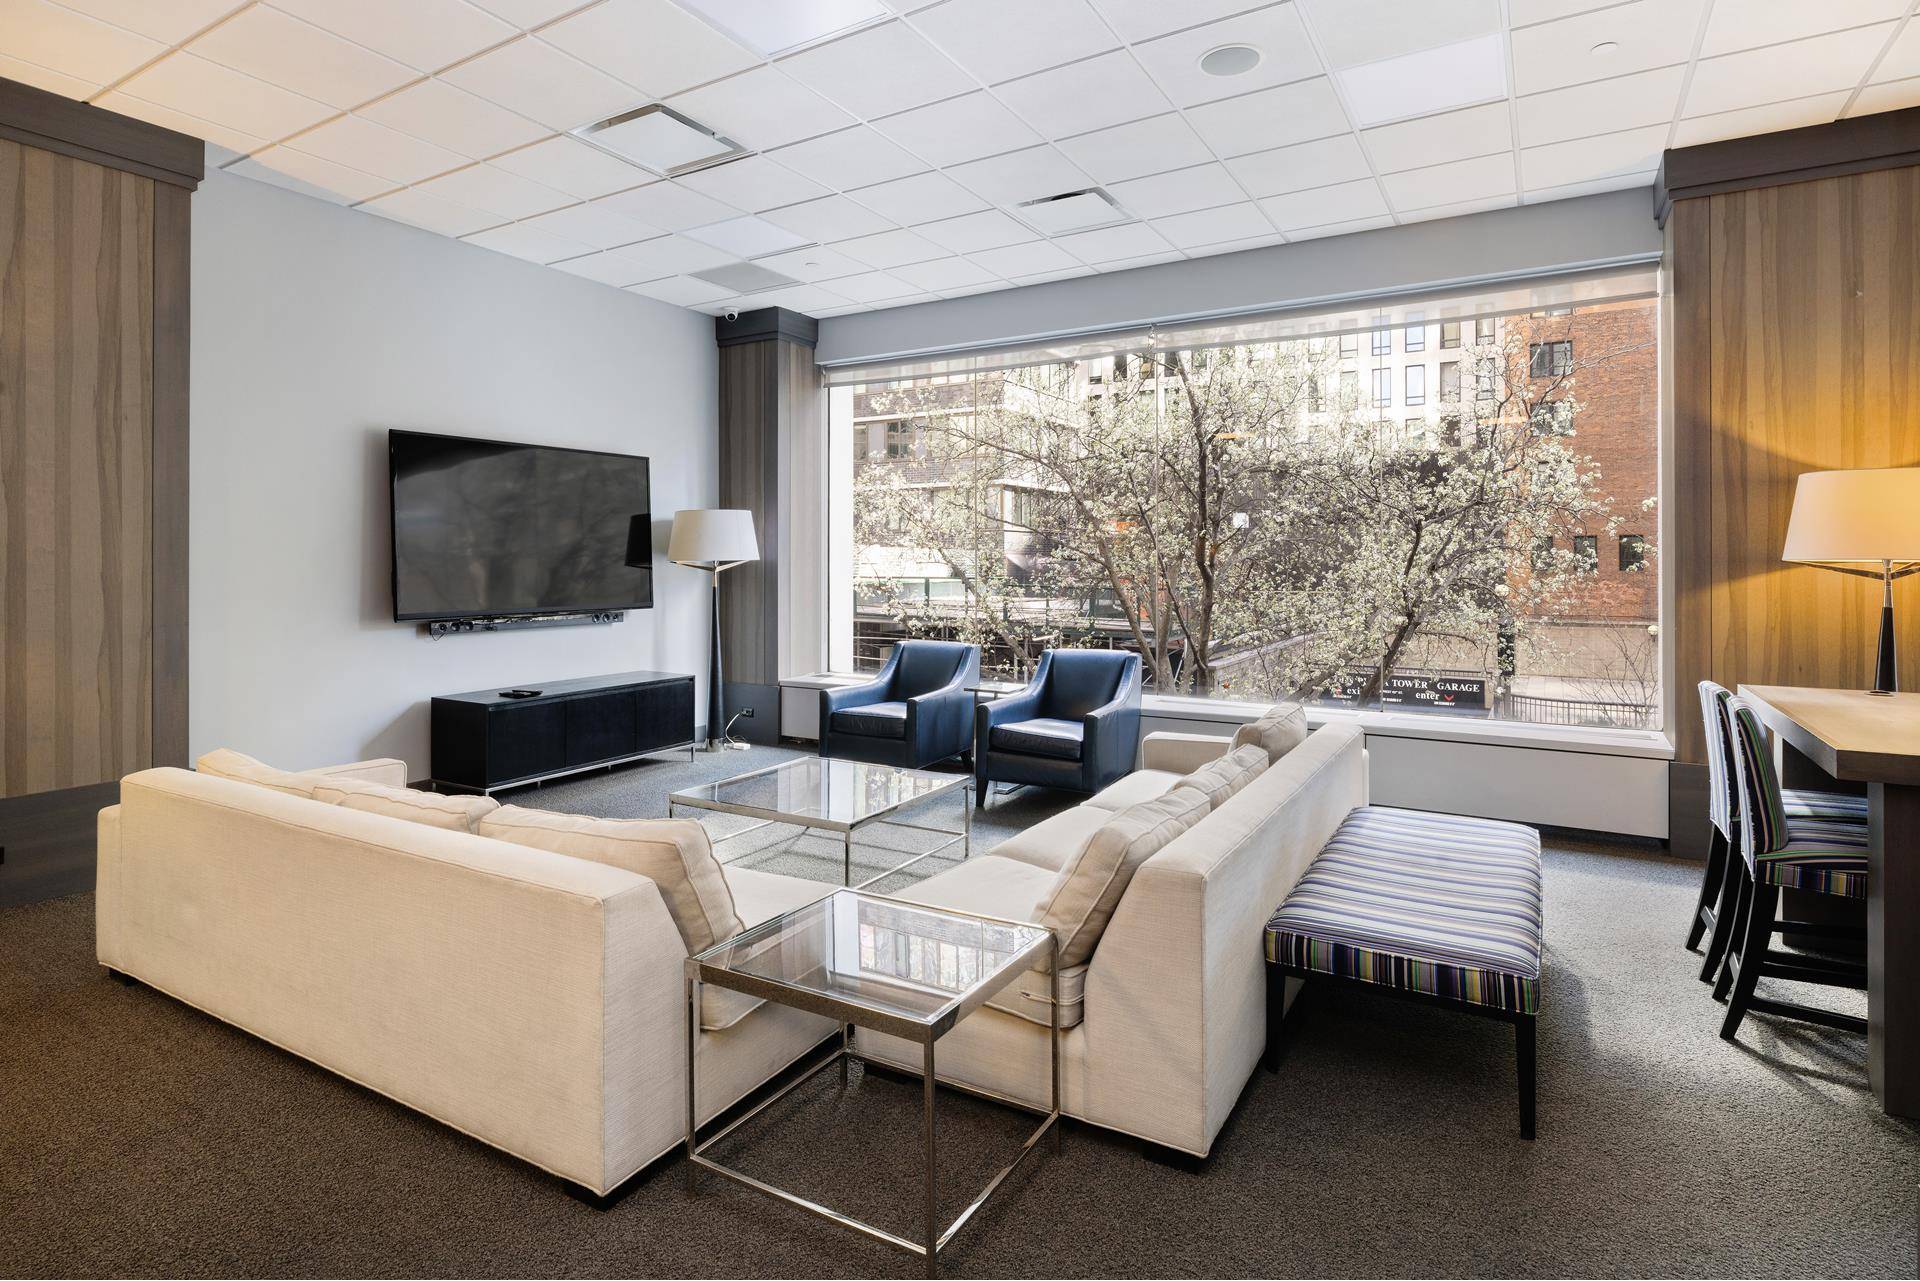 Stunning, South Facing One Bedroom apartment, located across the street from Lincoln Center and only 1 Block from Central Park.